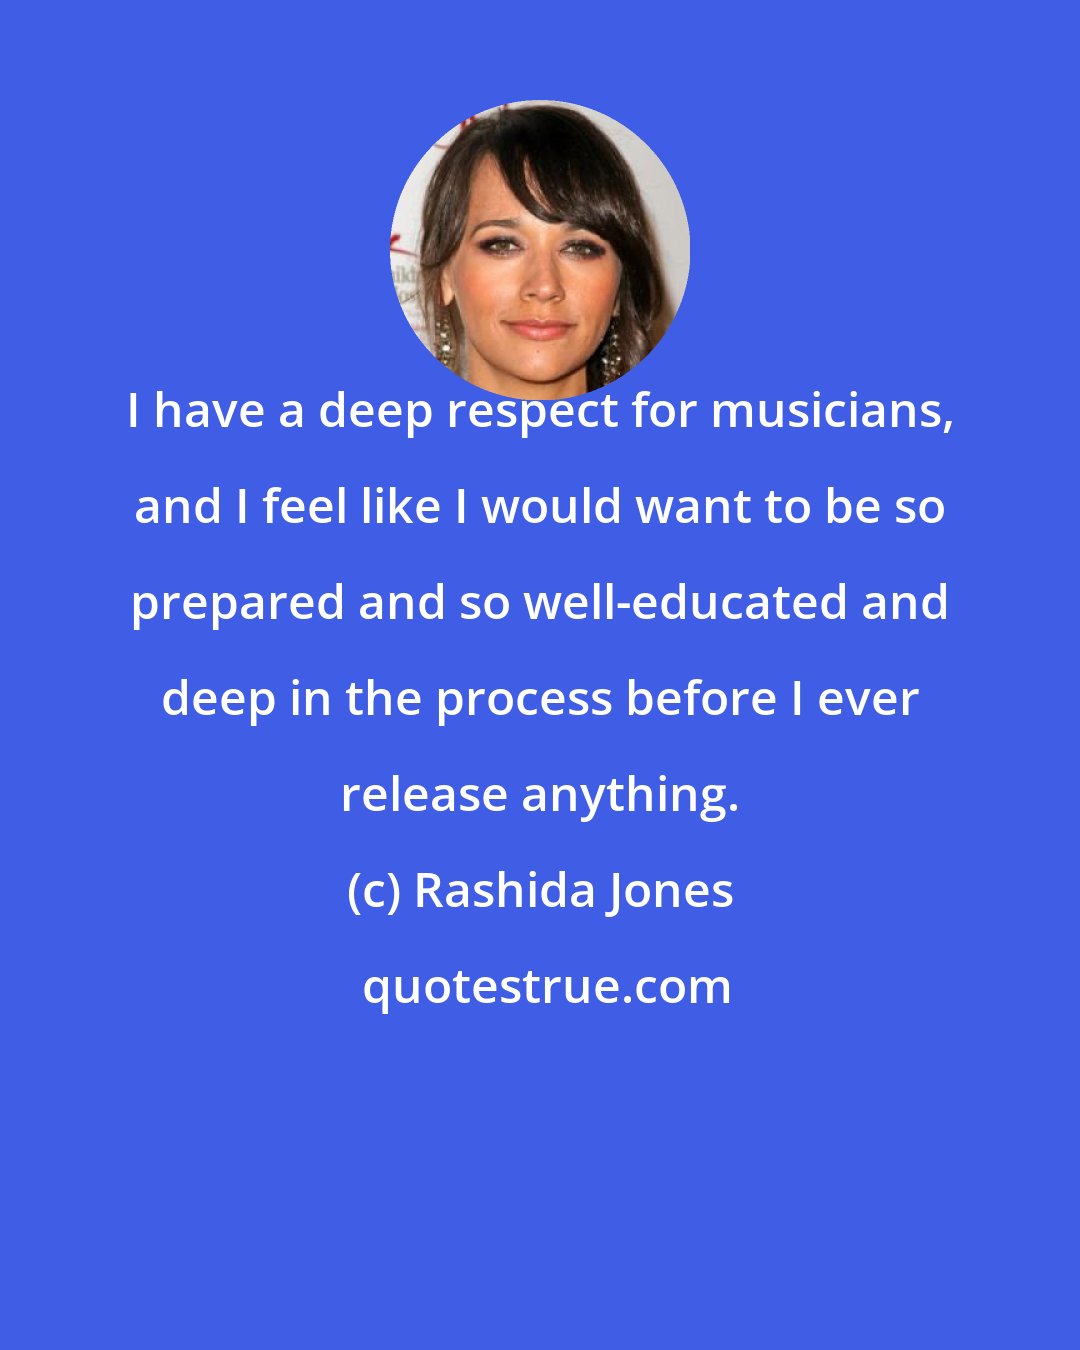 Rashida Jones: I have a deep respect for musicians, and I feel like I would want to be so prepared and so well-educated and deep in the process before I ever release anything.